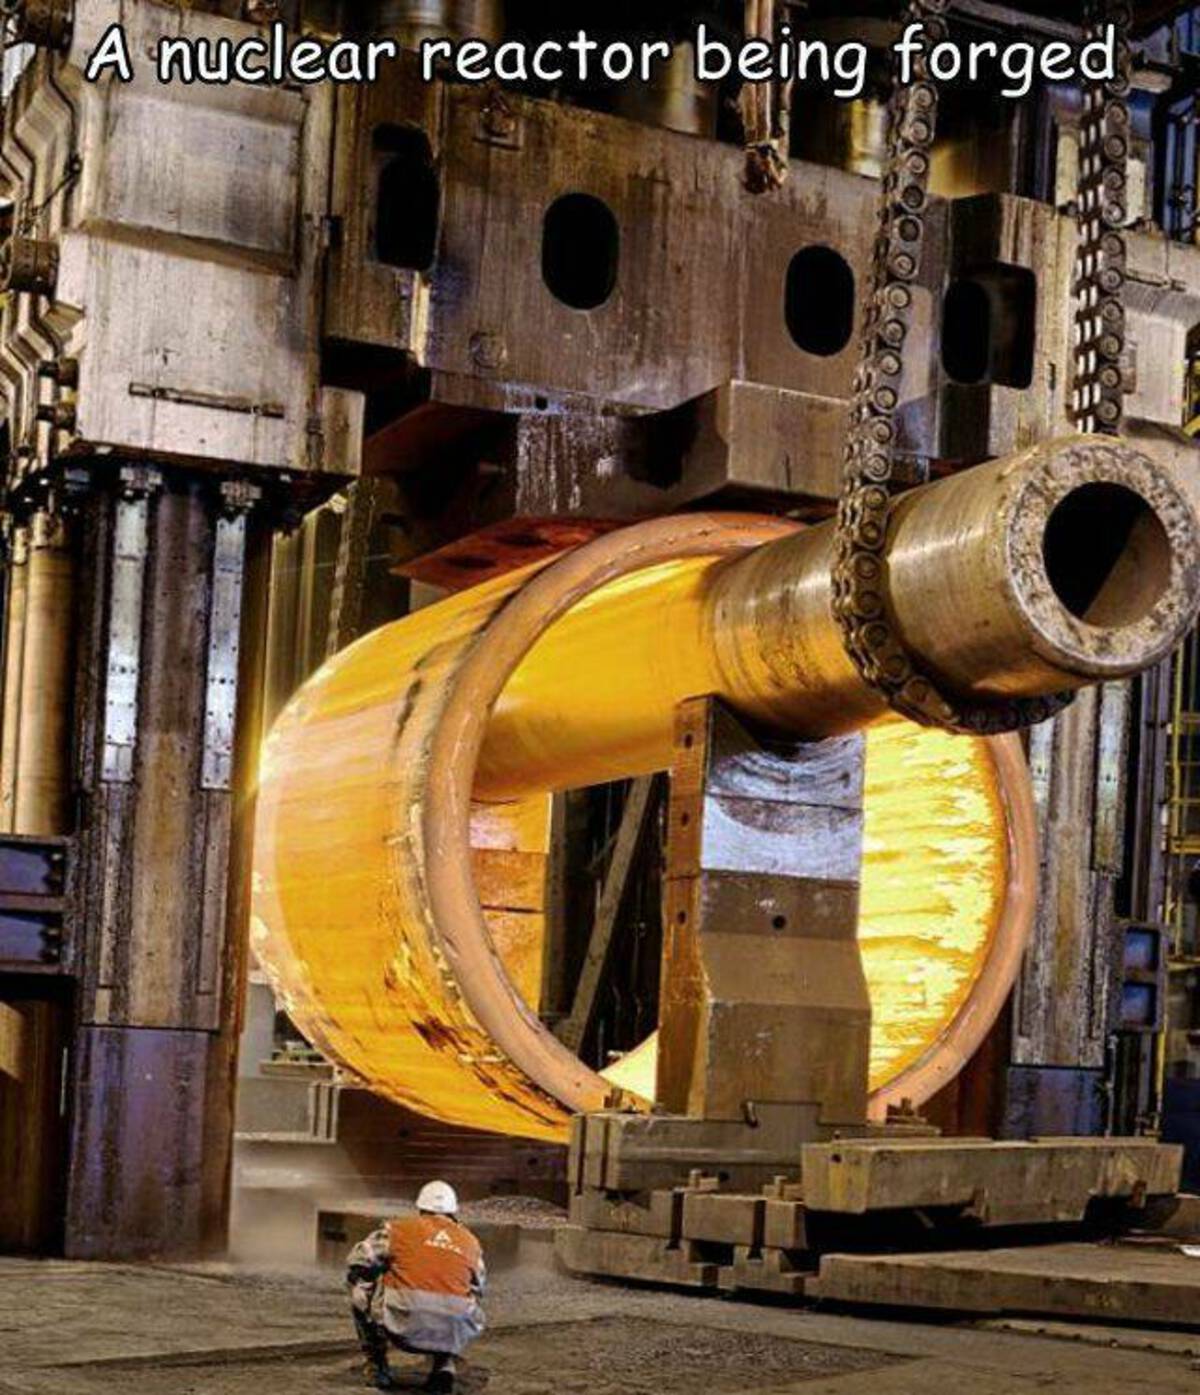 A nuclear reactor being forged